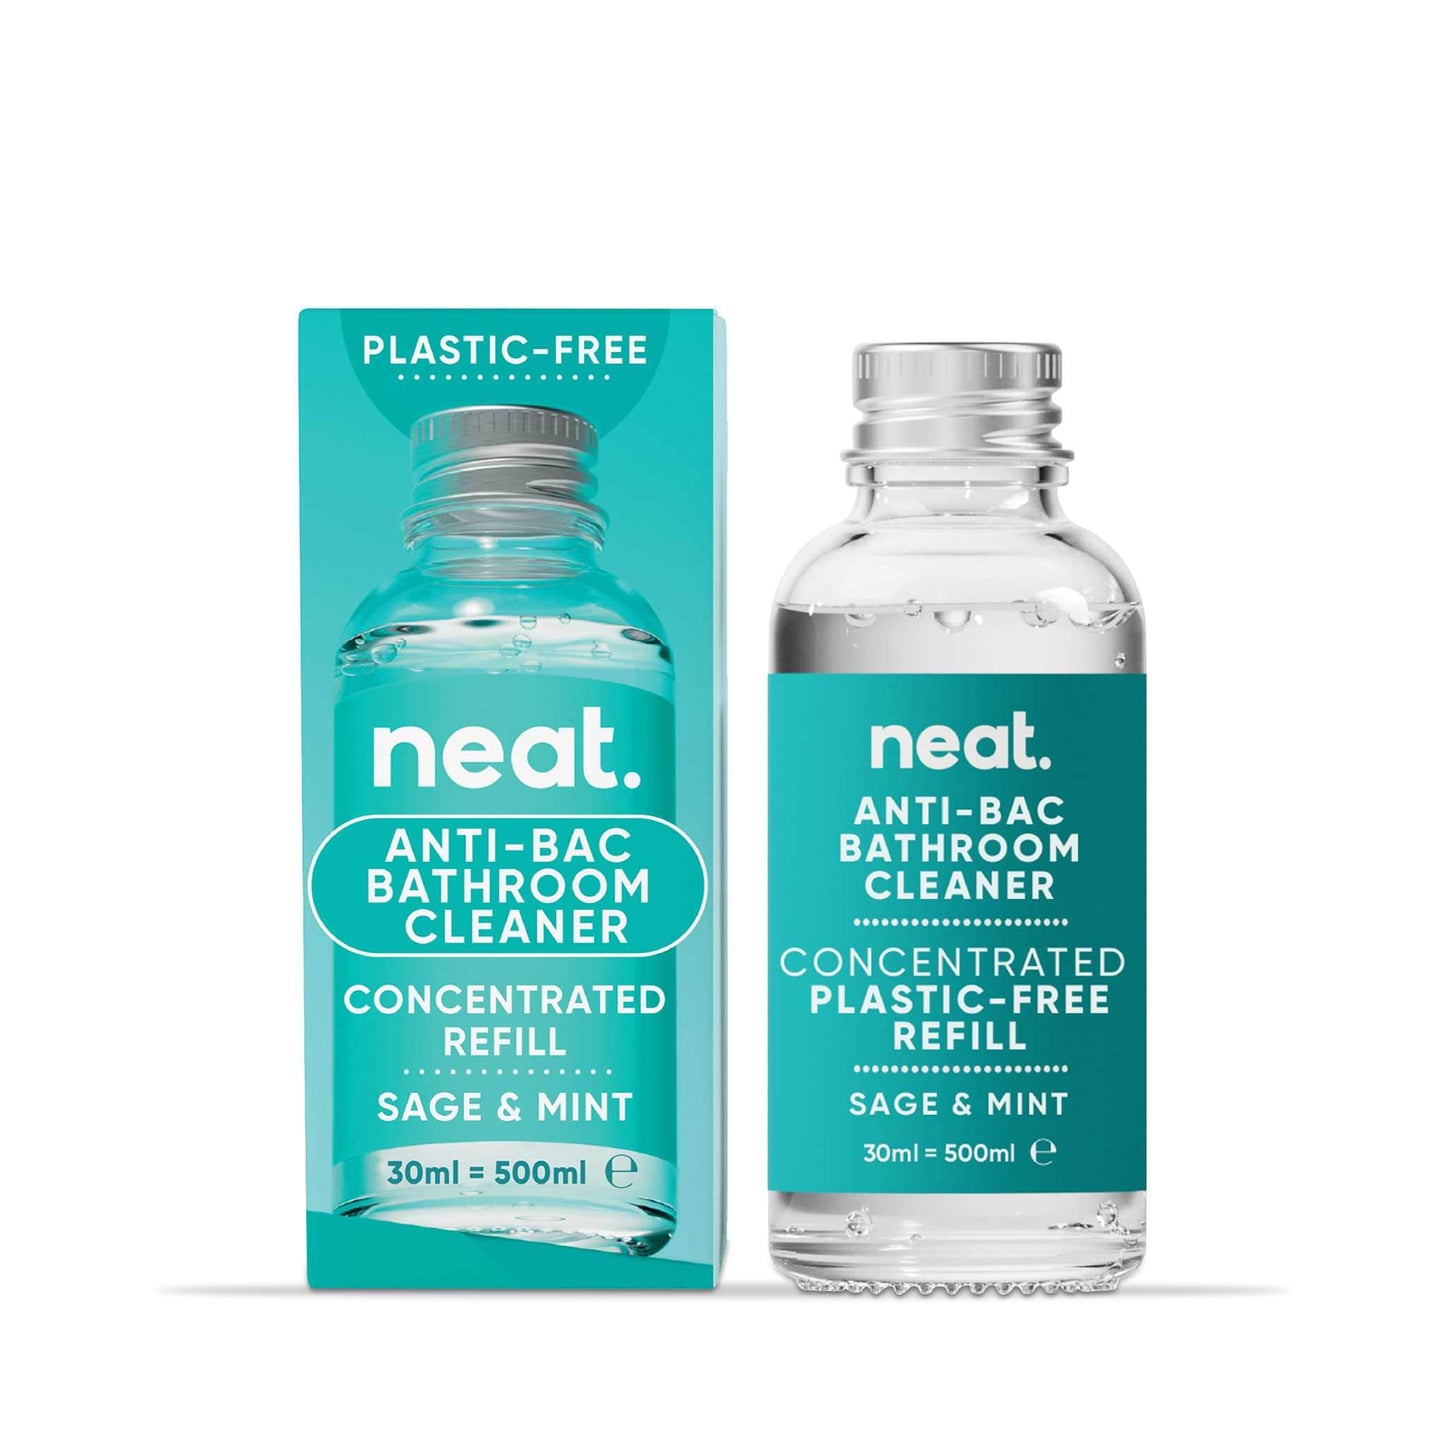 neat. Cleaning Detergents neat - Concentrated Anti-Bac Bathroom Cleaner Refill - Sage & Mint